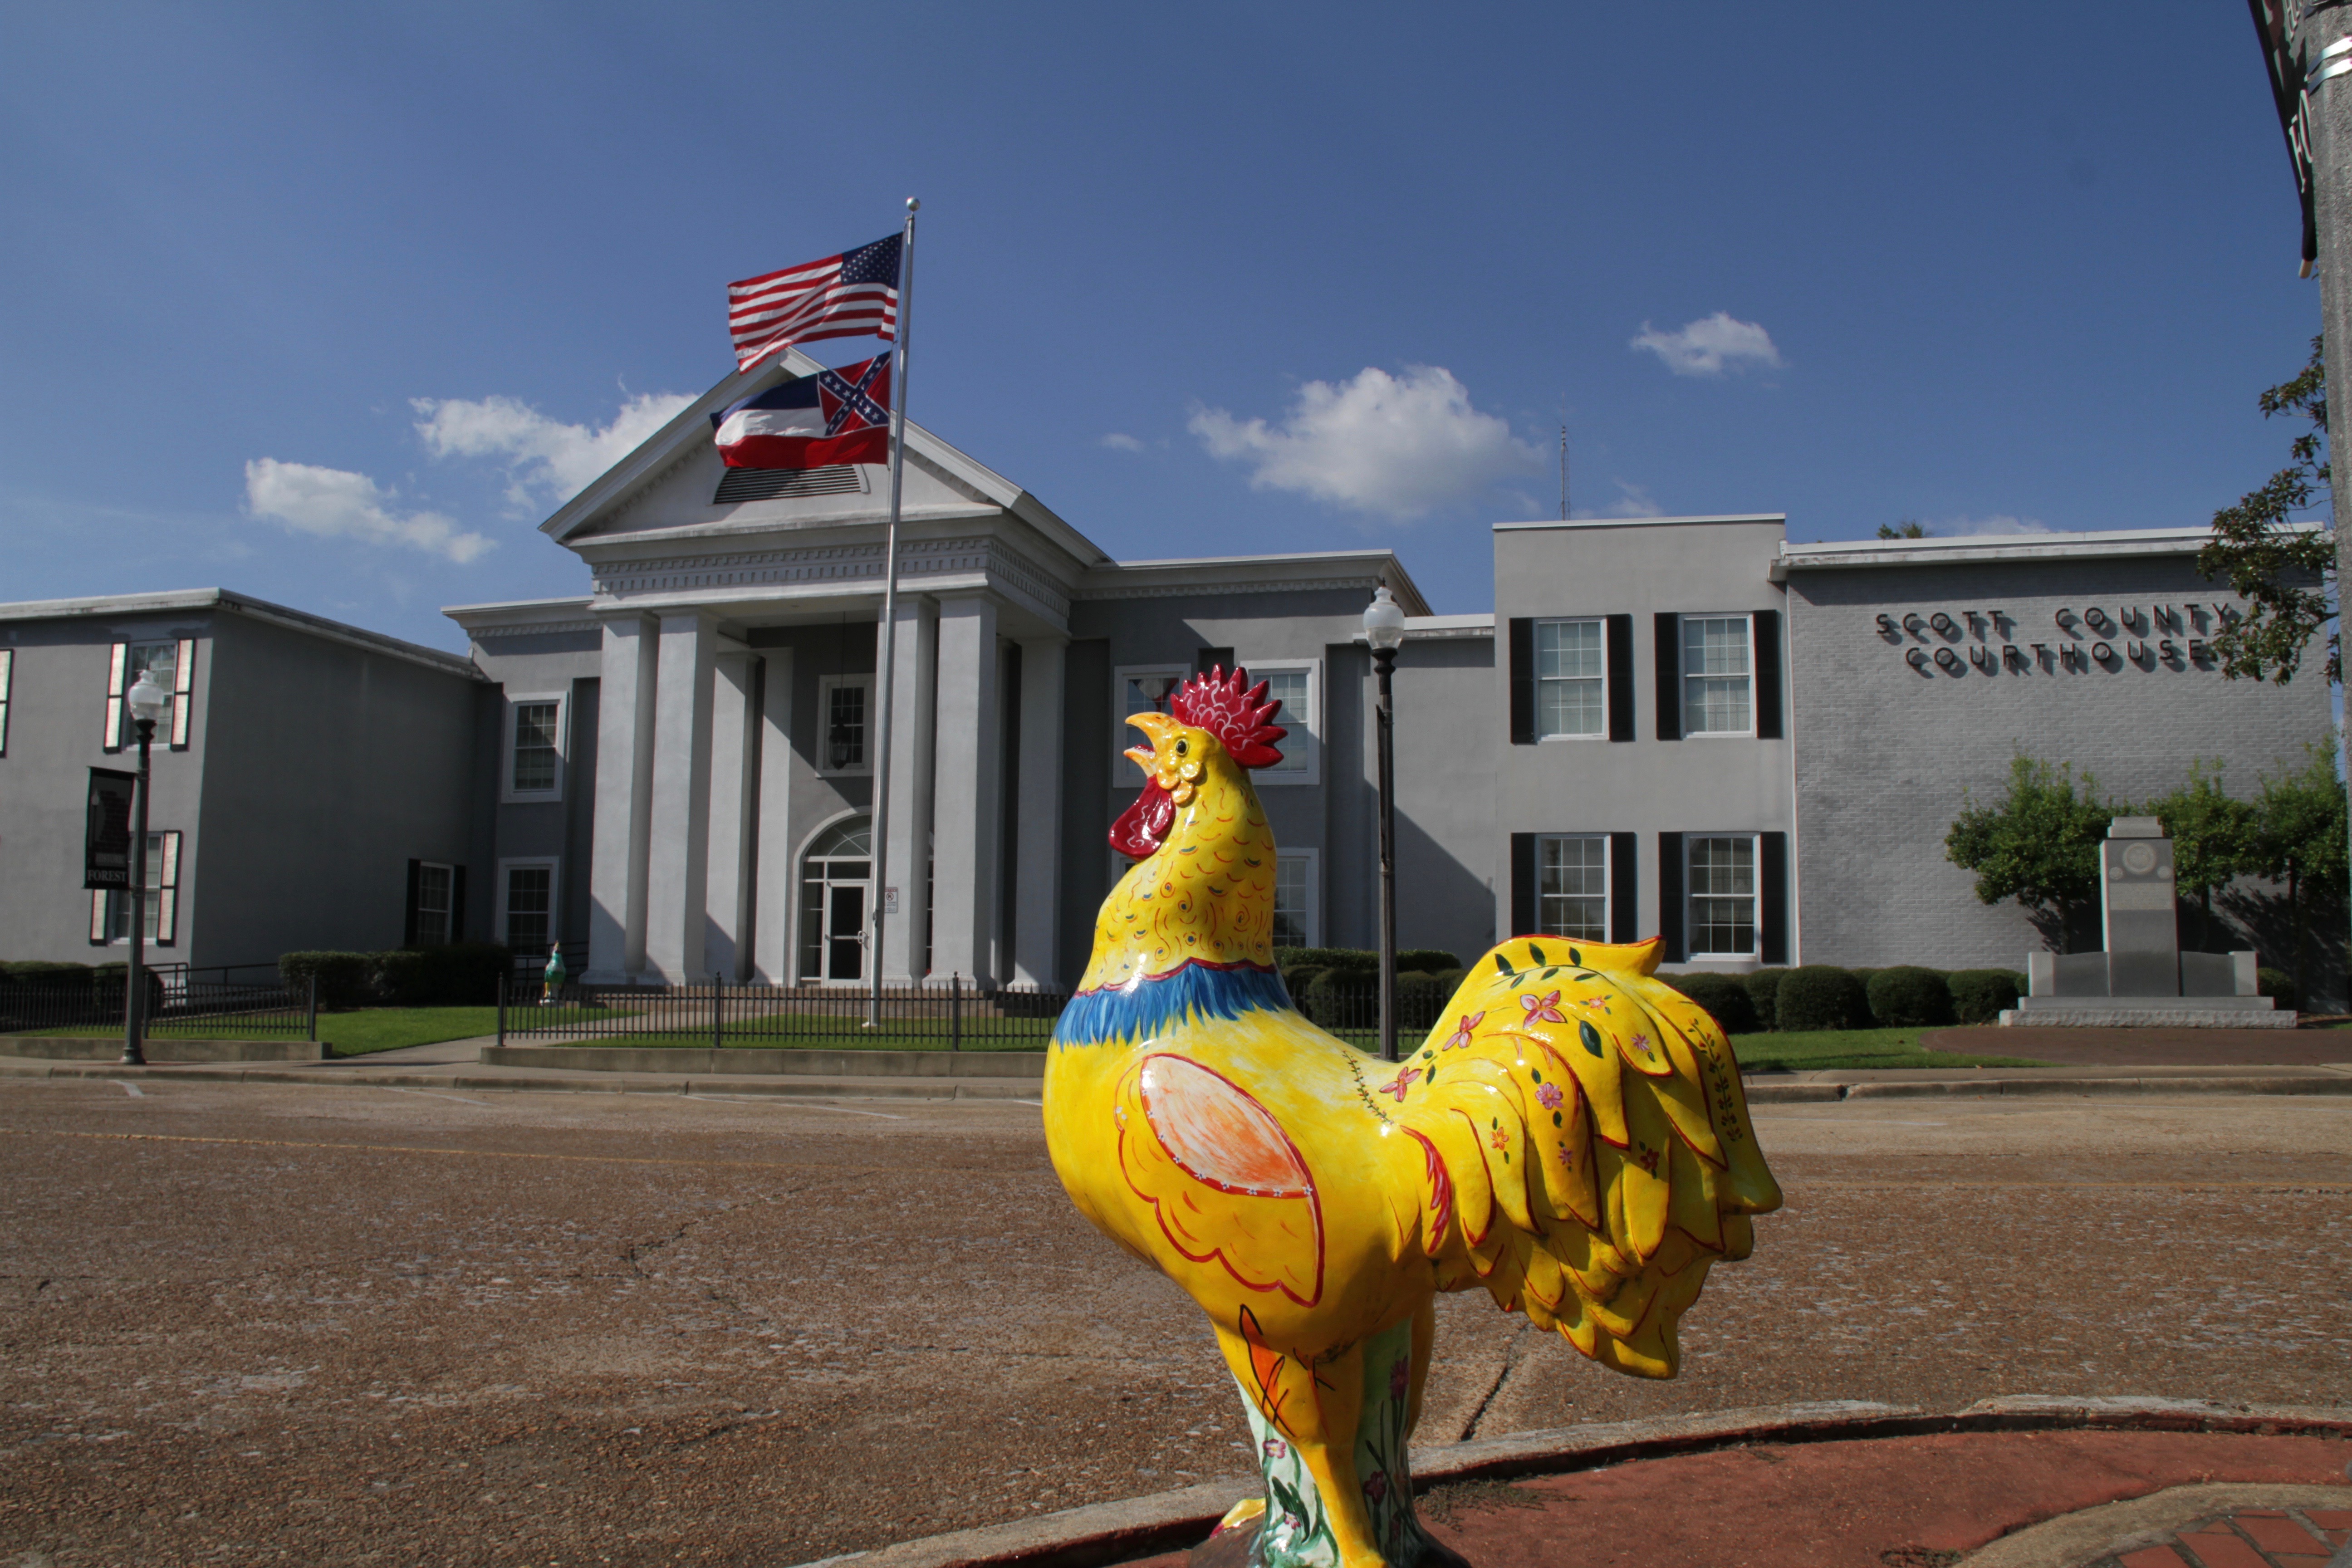 A chicken statue in front of a courthouse flying the Mississippi state flag.